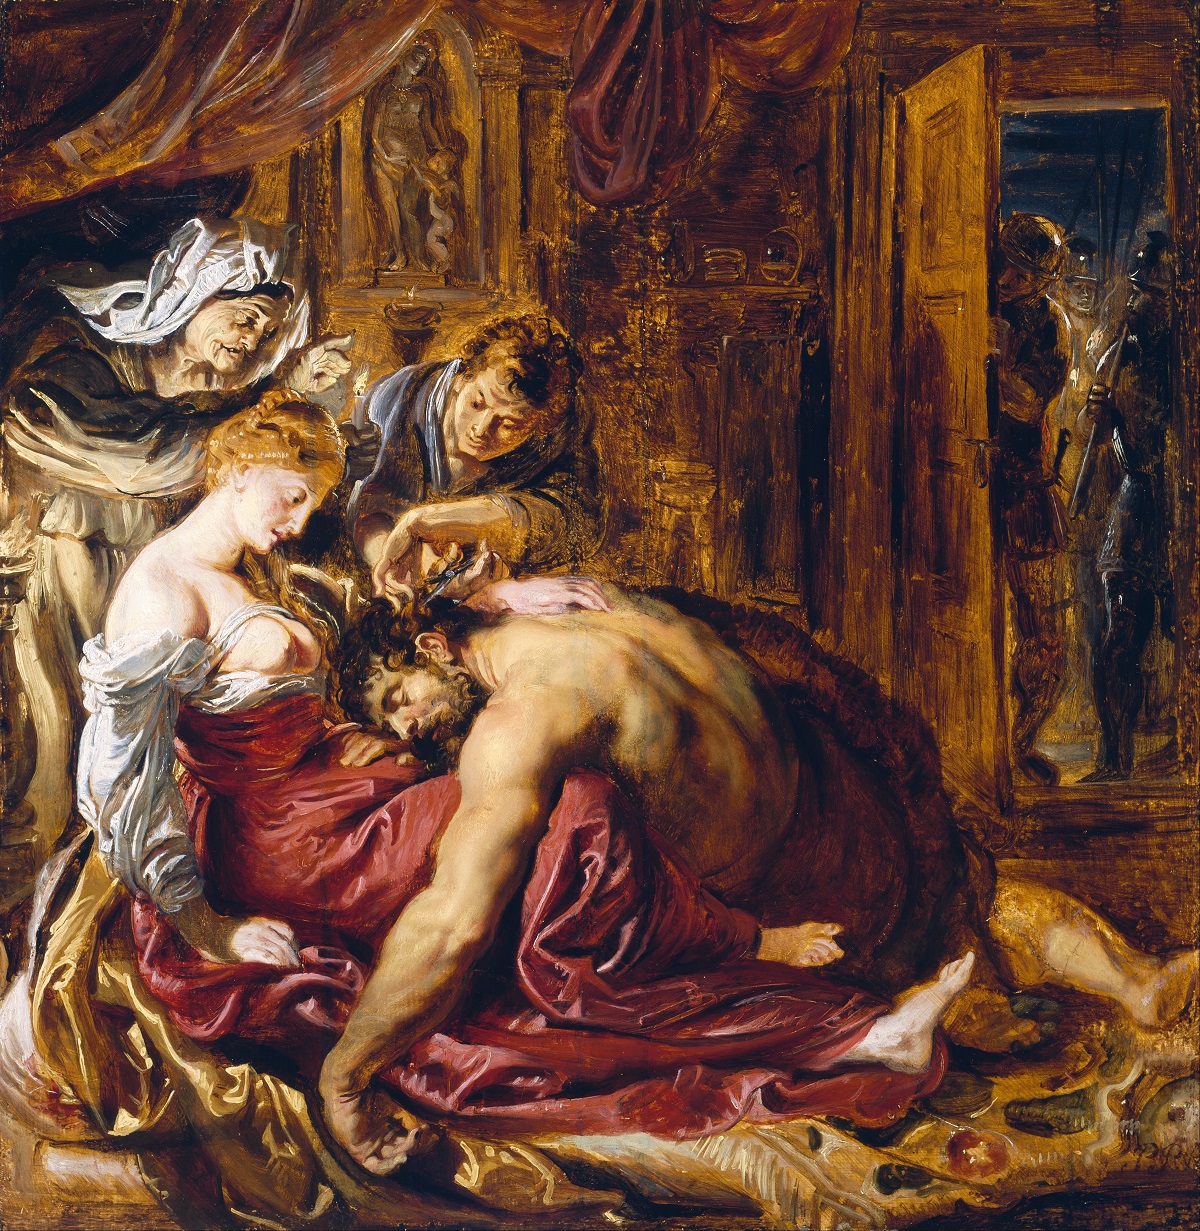 Samson and Delilah, oil on canvas by Peter Paul Rubens (1577–1640), Cincinnati Art Museum collection